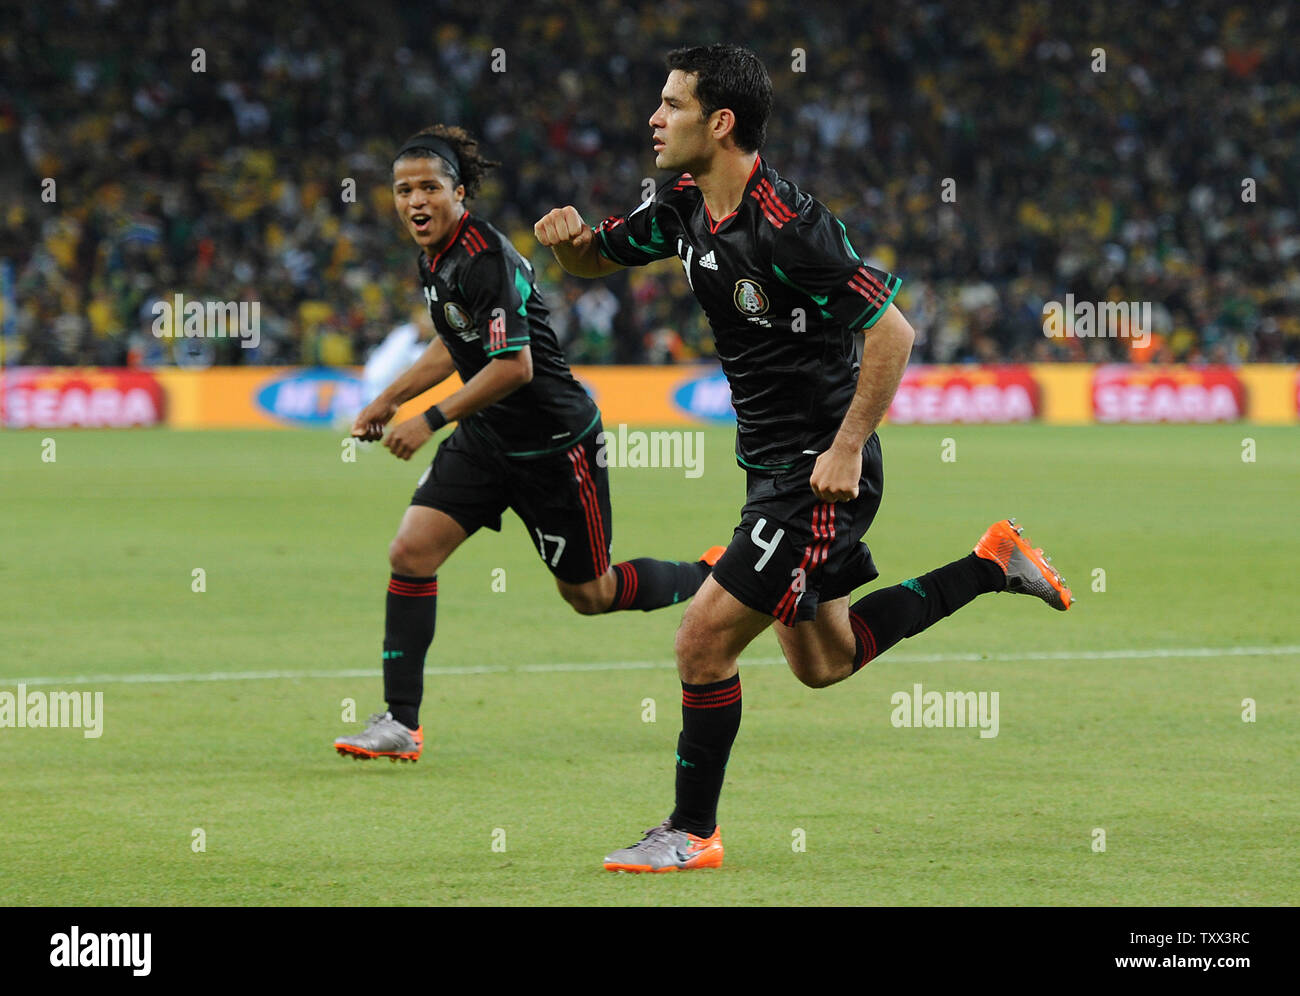 Rafael Marquez of Mexico celebrates scoring the equalising goal during the Group A match at Soccer City in Johannesburg, South Africa on June 11, 2010. UPI/Chris Brunskill Stock Photo